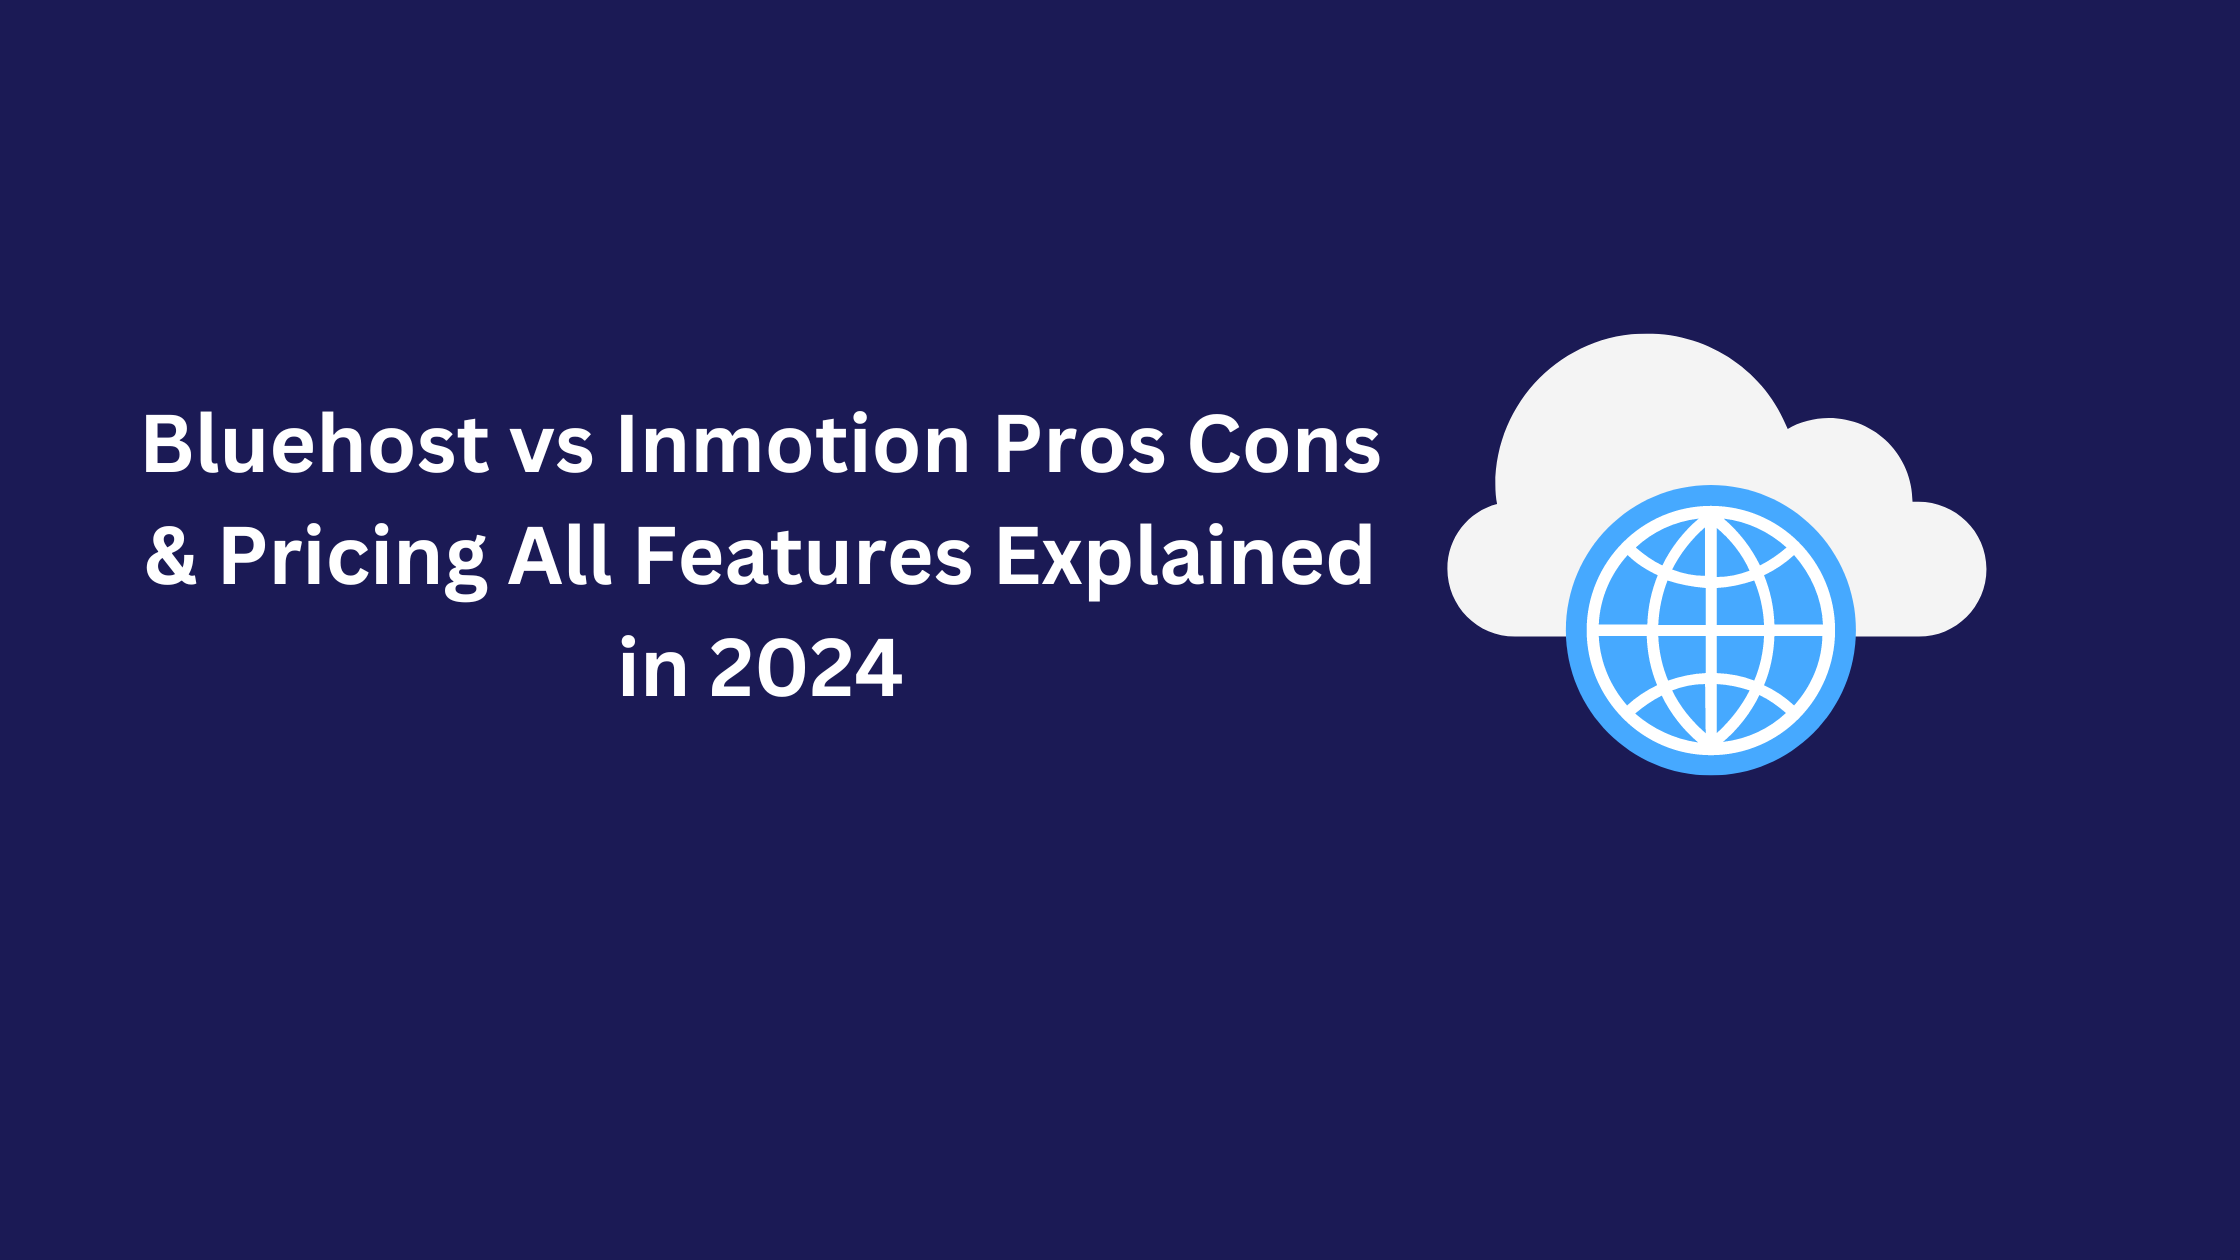 Bluehost vs Inmotion Pros Cons & Pricing All Features Explained in 2024